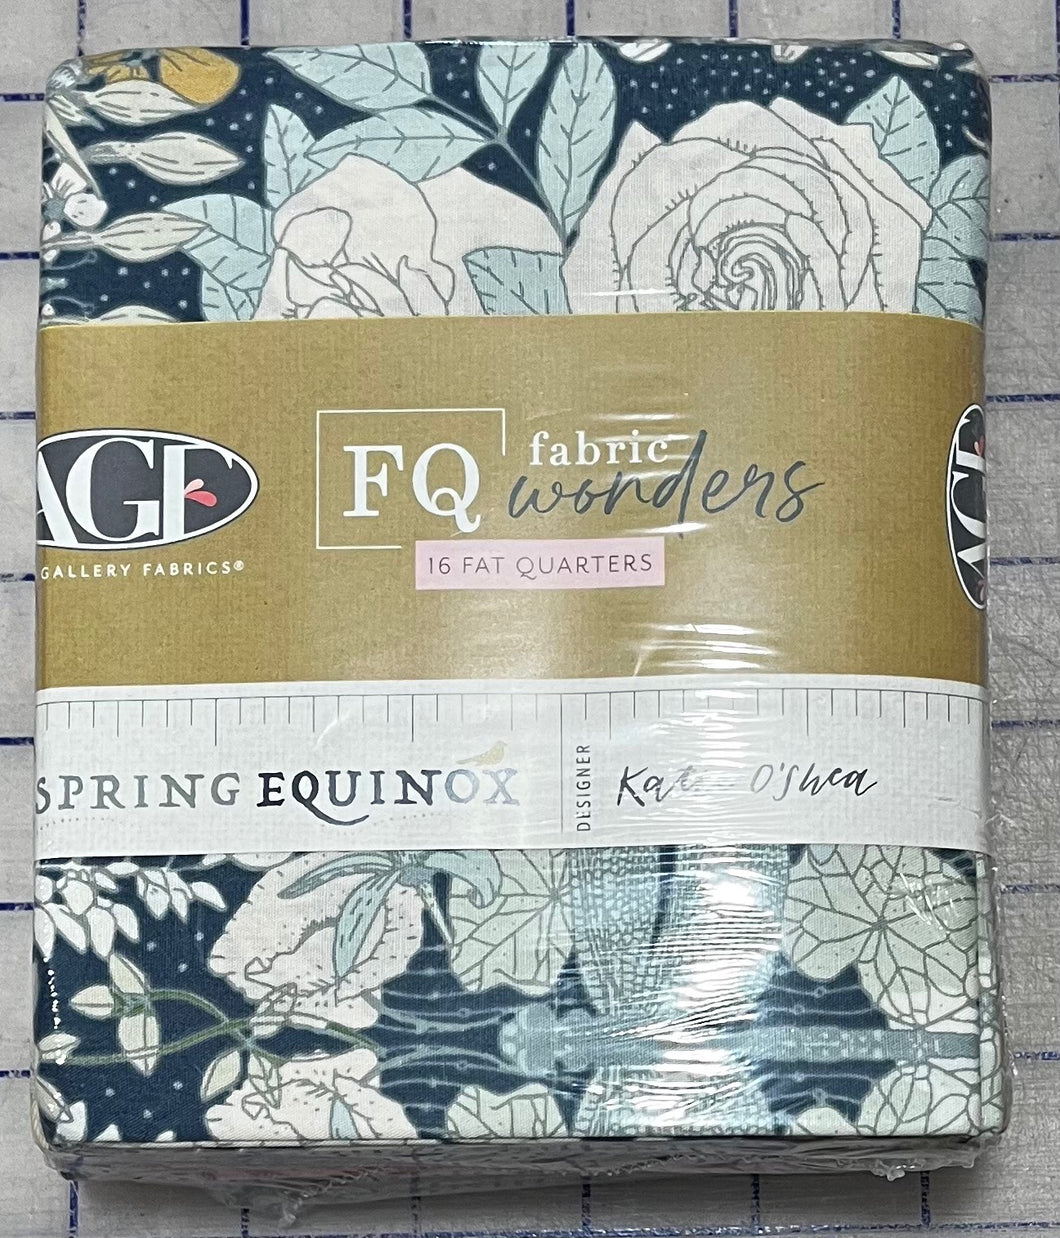 FQ Fabric Wonders From Spring Equinox